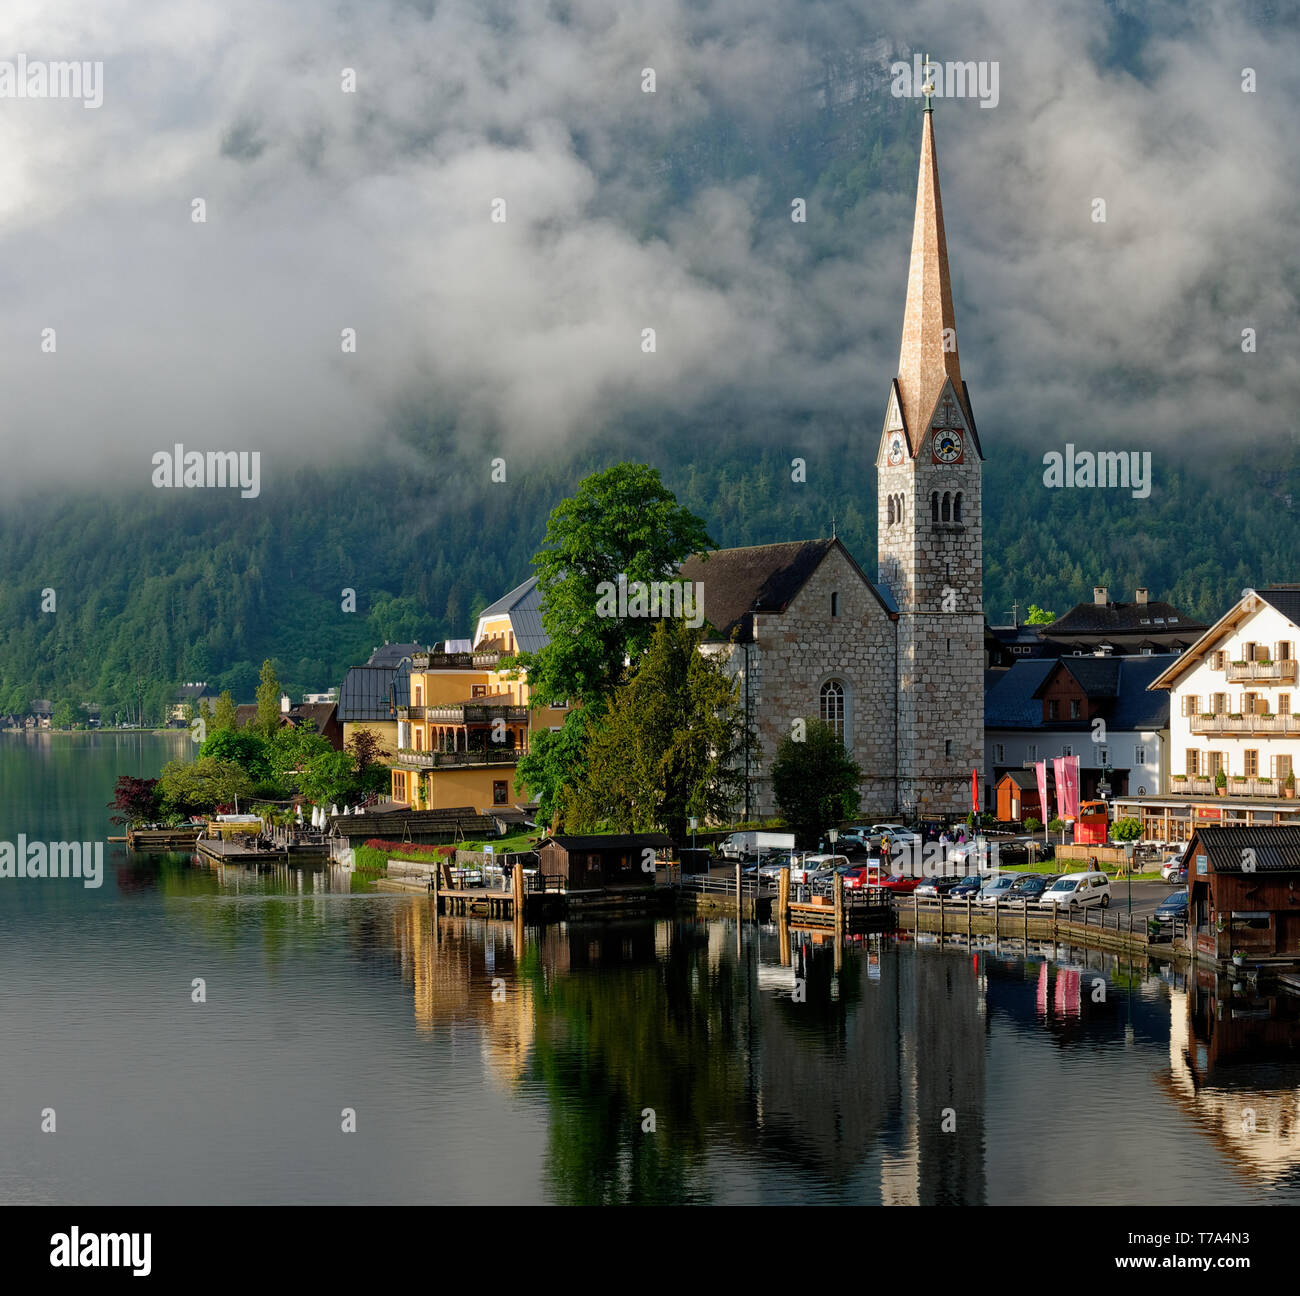 Early morning shot of the Evangelical Church of Hallstatt (Evangelische Pfarrkirche Hallstatt) and a lake reflection with low cloud in the background Stock Photo